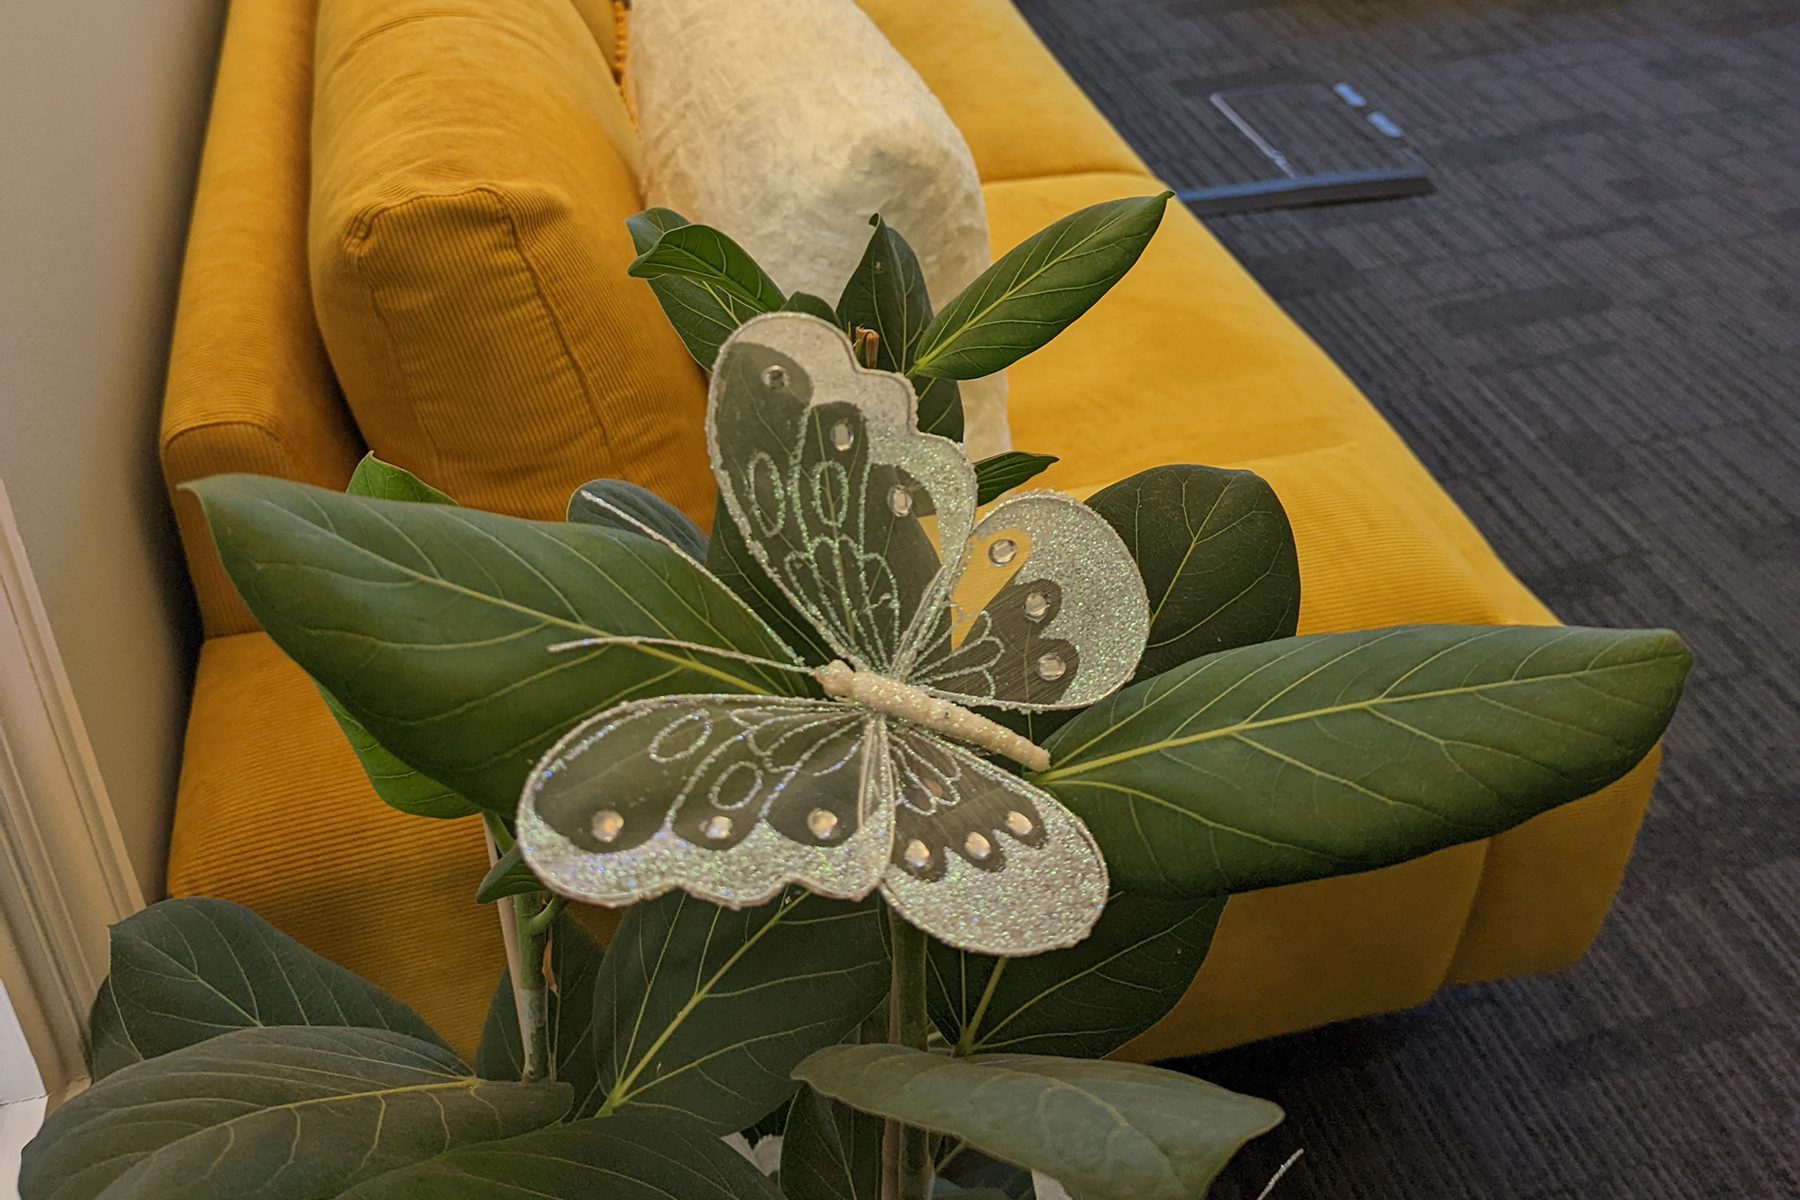 Image of a plant with decorative butterfly